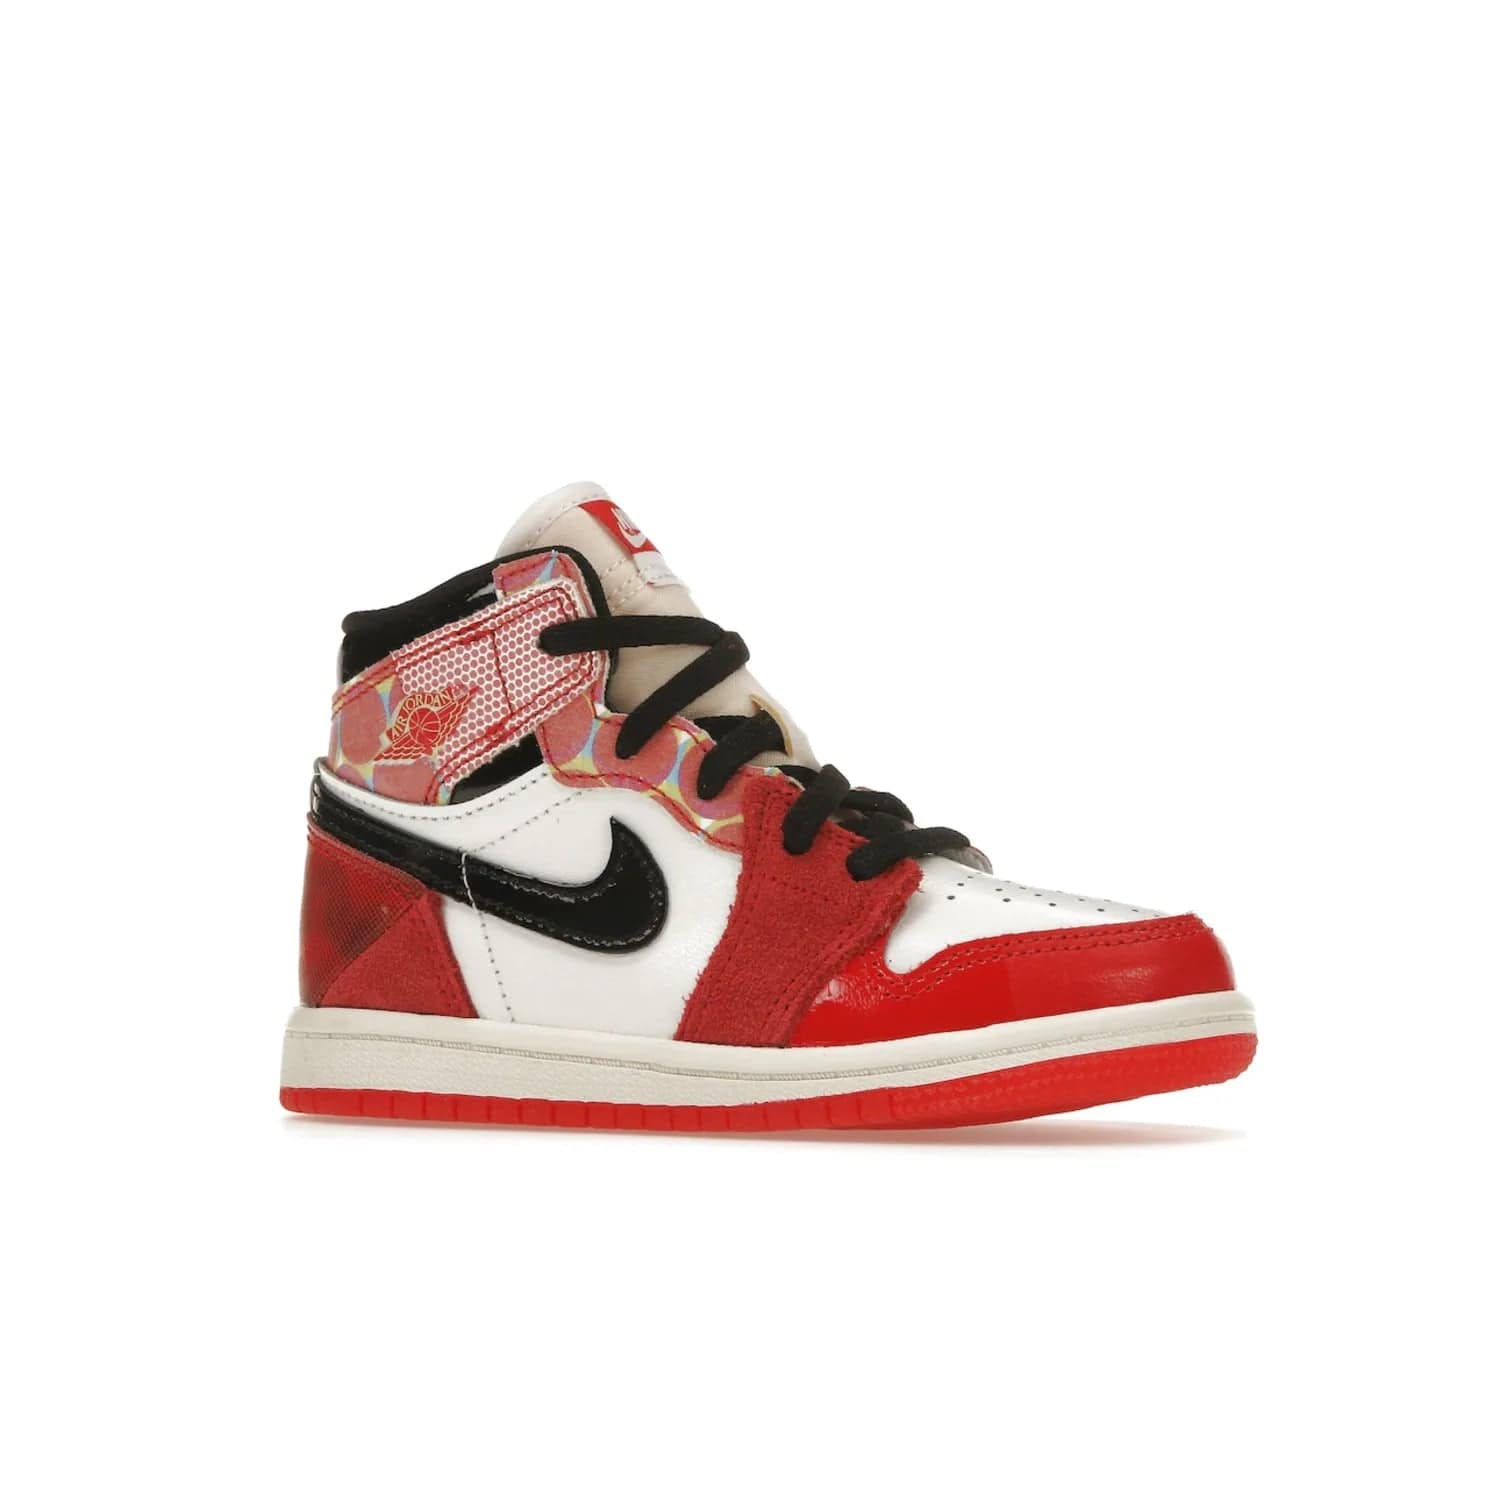 Jordan 1 High OG Spider-Man Across the Spider-Verse (TD) - Image 3 - Only at www.BallersClubKickz.com - The University Red/Black/White Spider-Man Across the Spider-Verse Air Jordan 1 High OG features bold accents and an eye-catching design. Releasing May 2023.